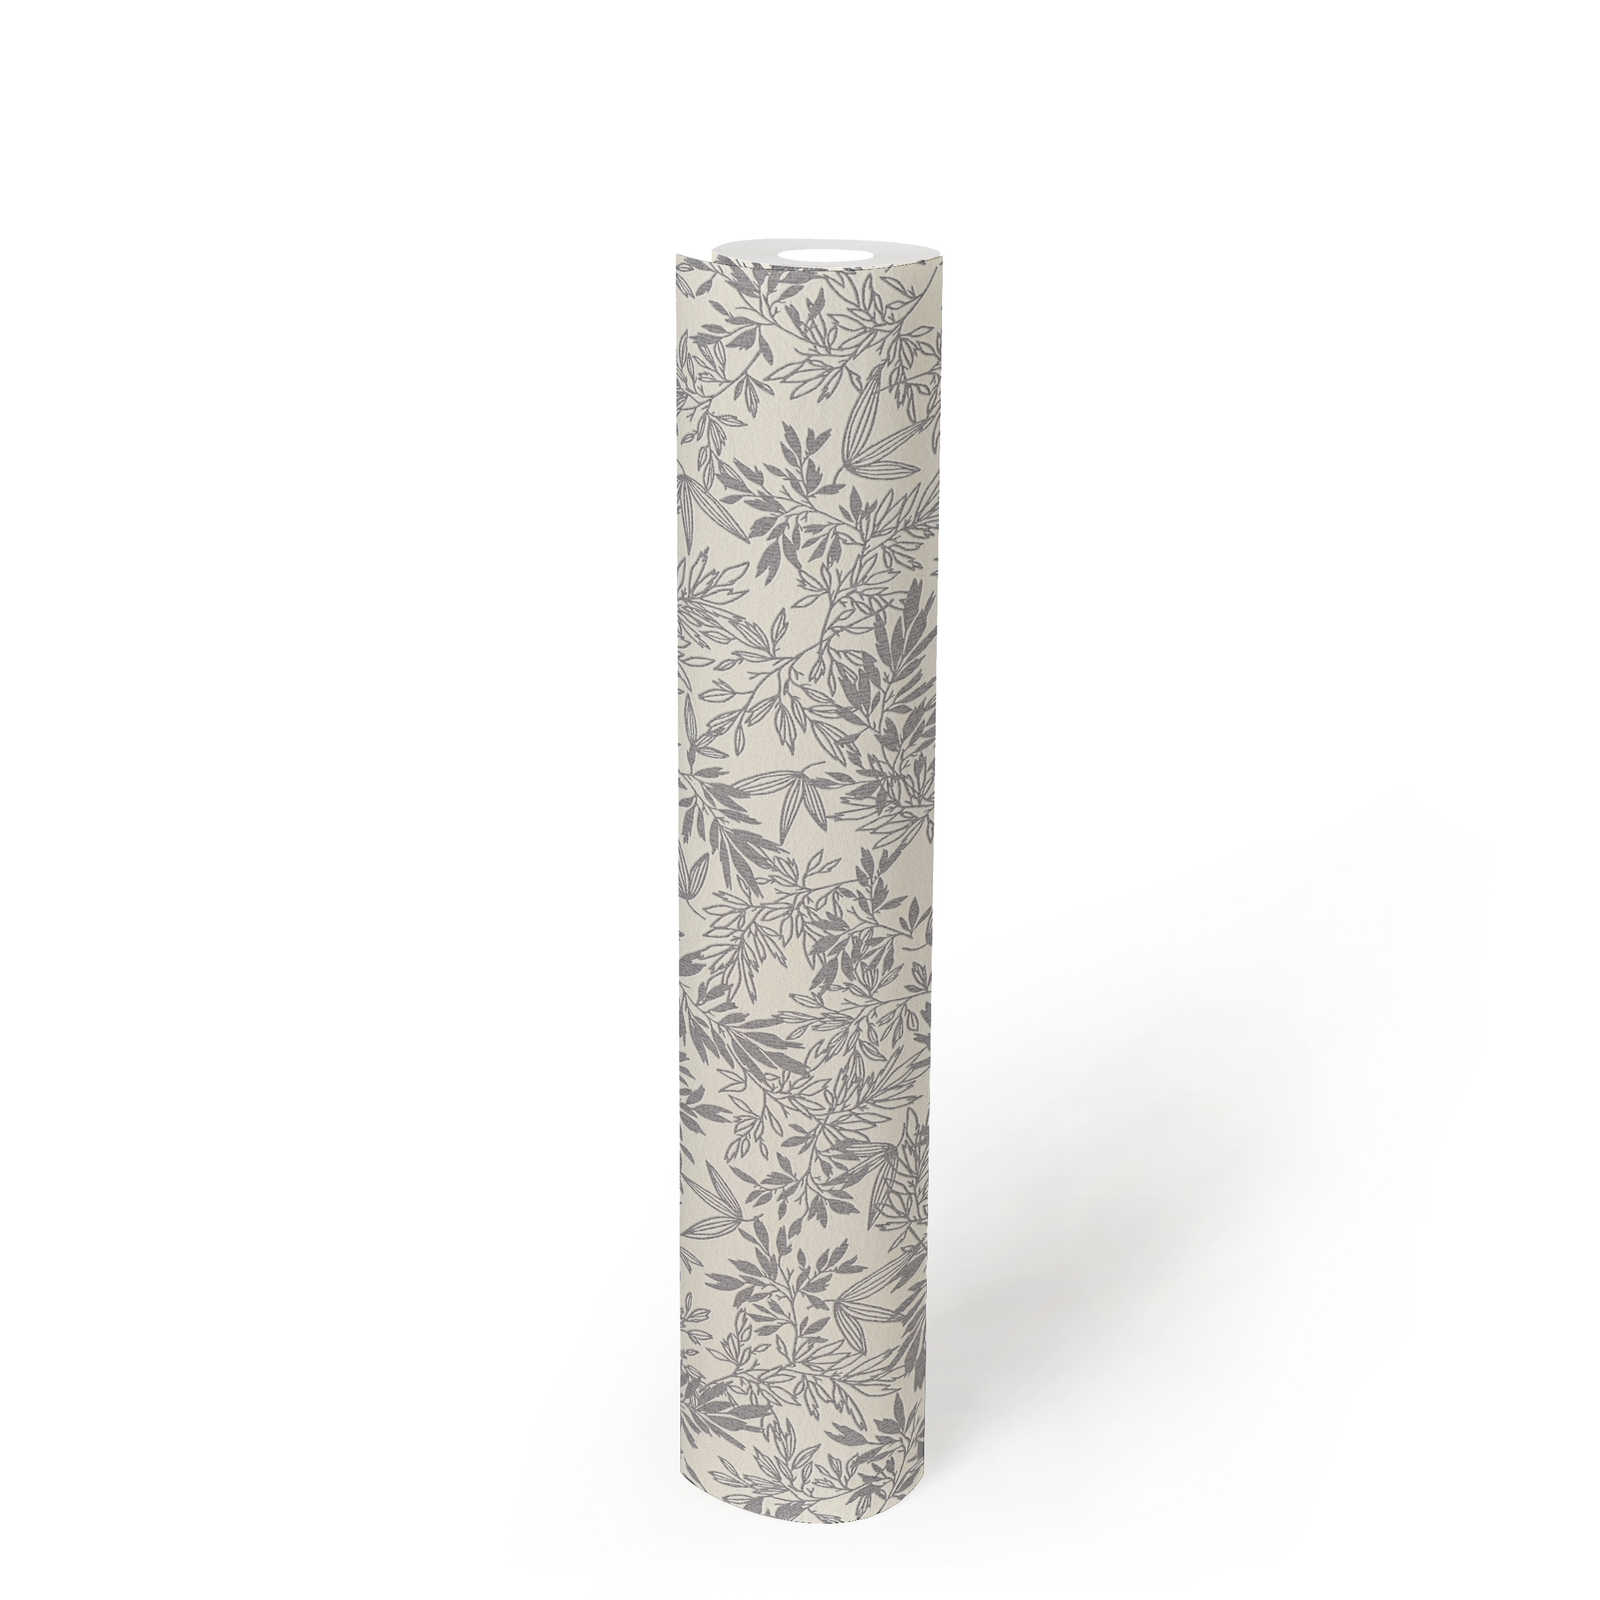             Floral wallpaper with leaves pattern in matt - grey, white
        